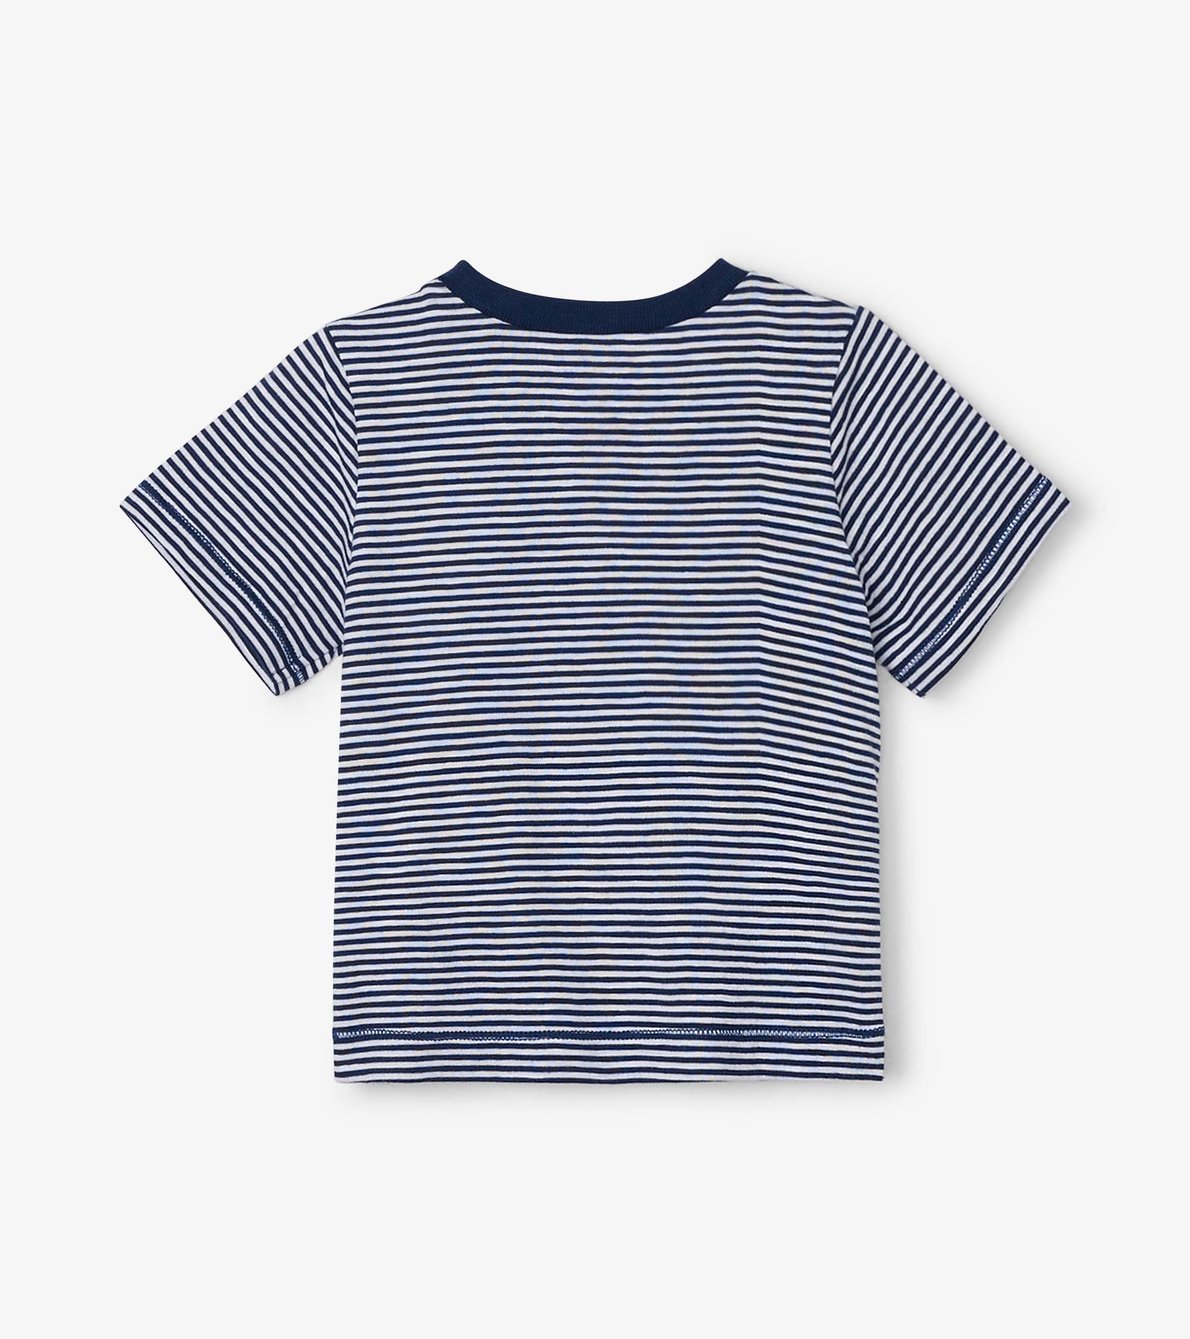 View larger image of Ahoy! Baby Graphic Tee